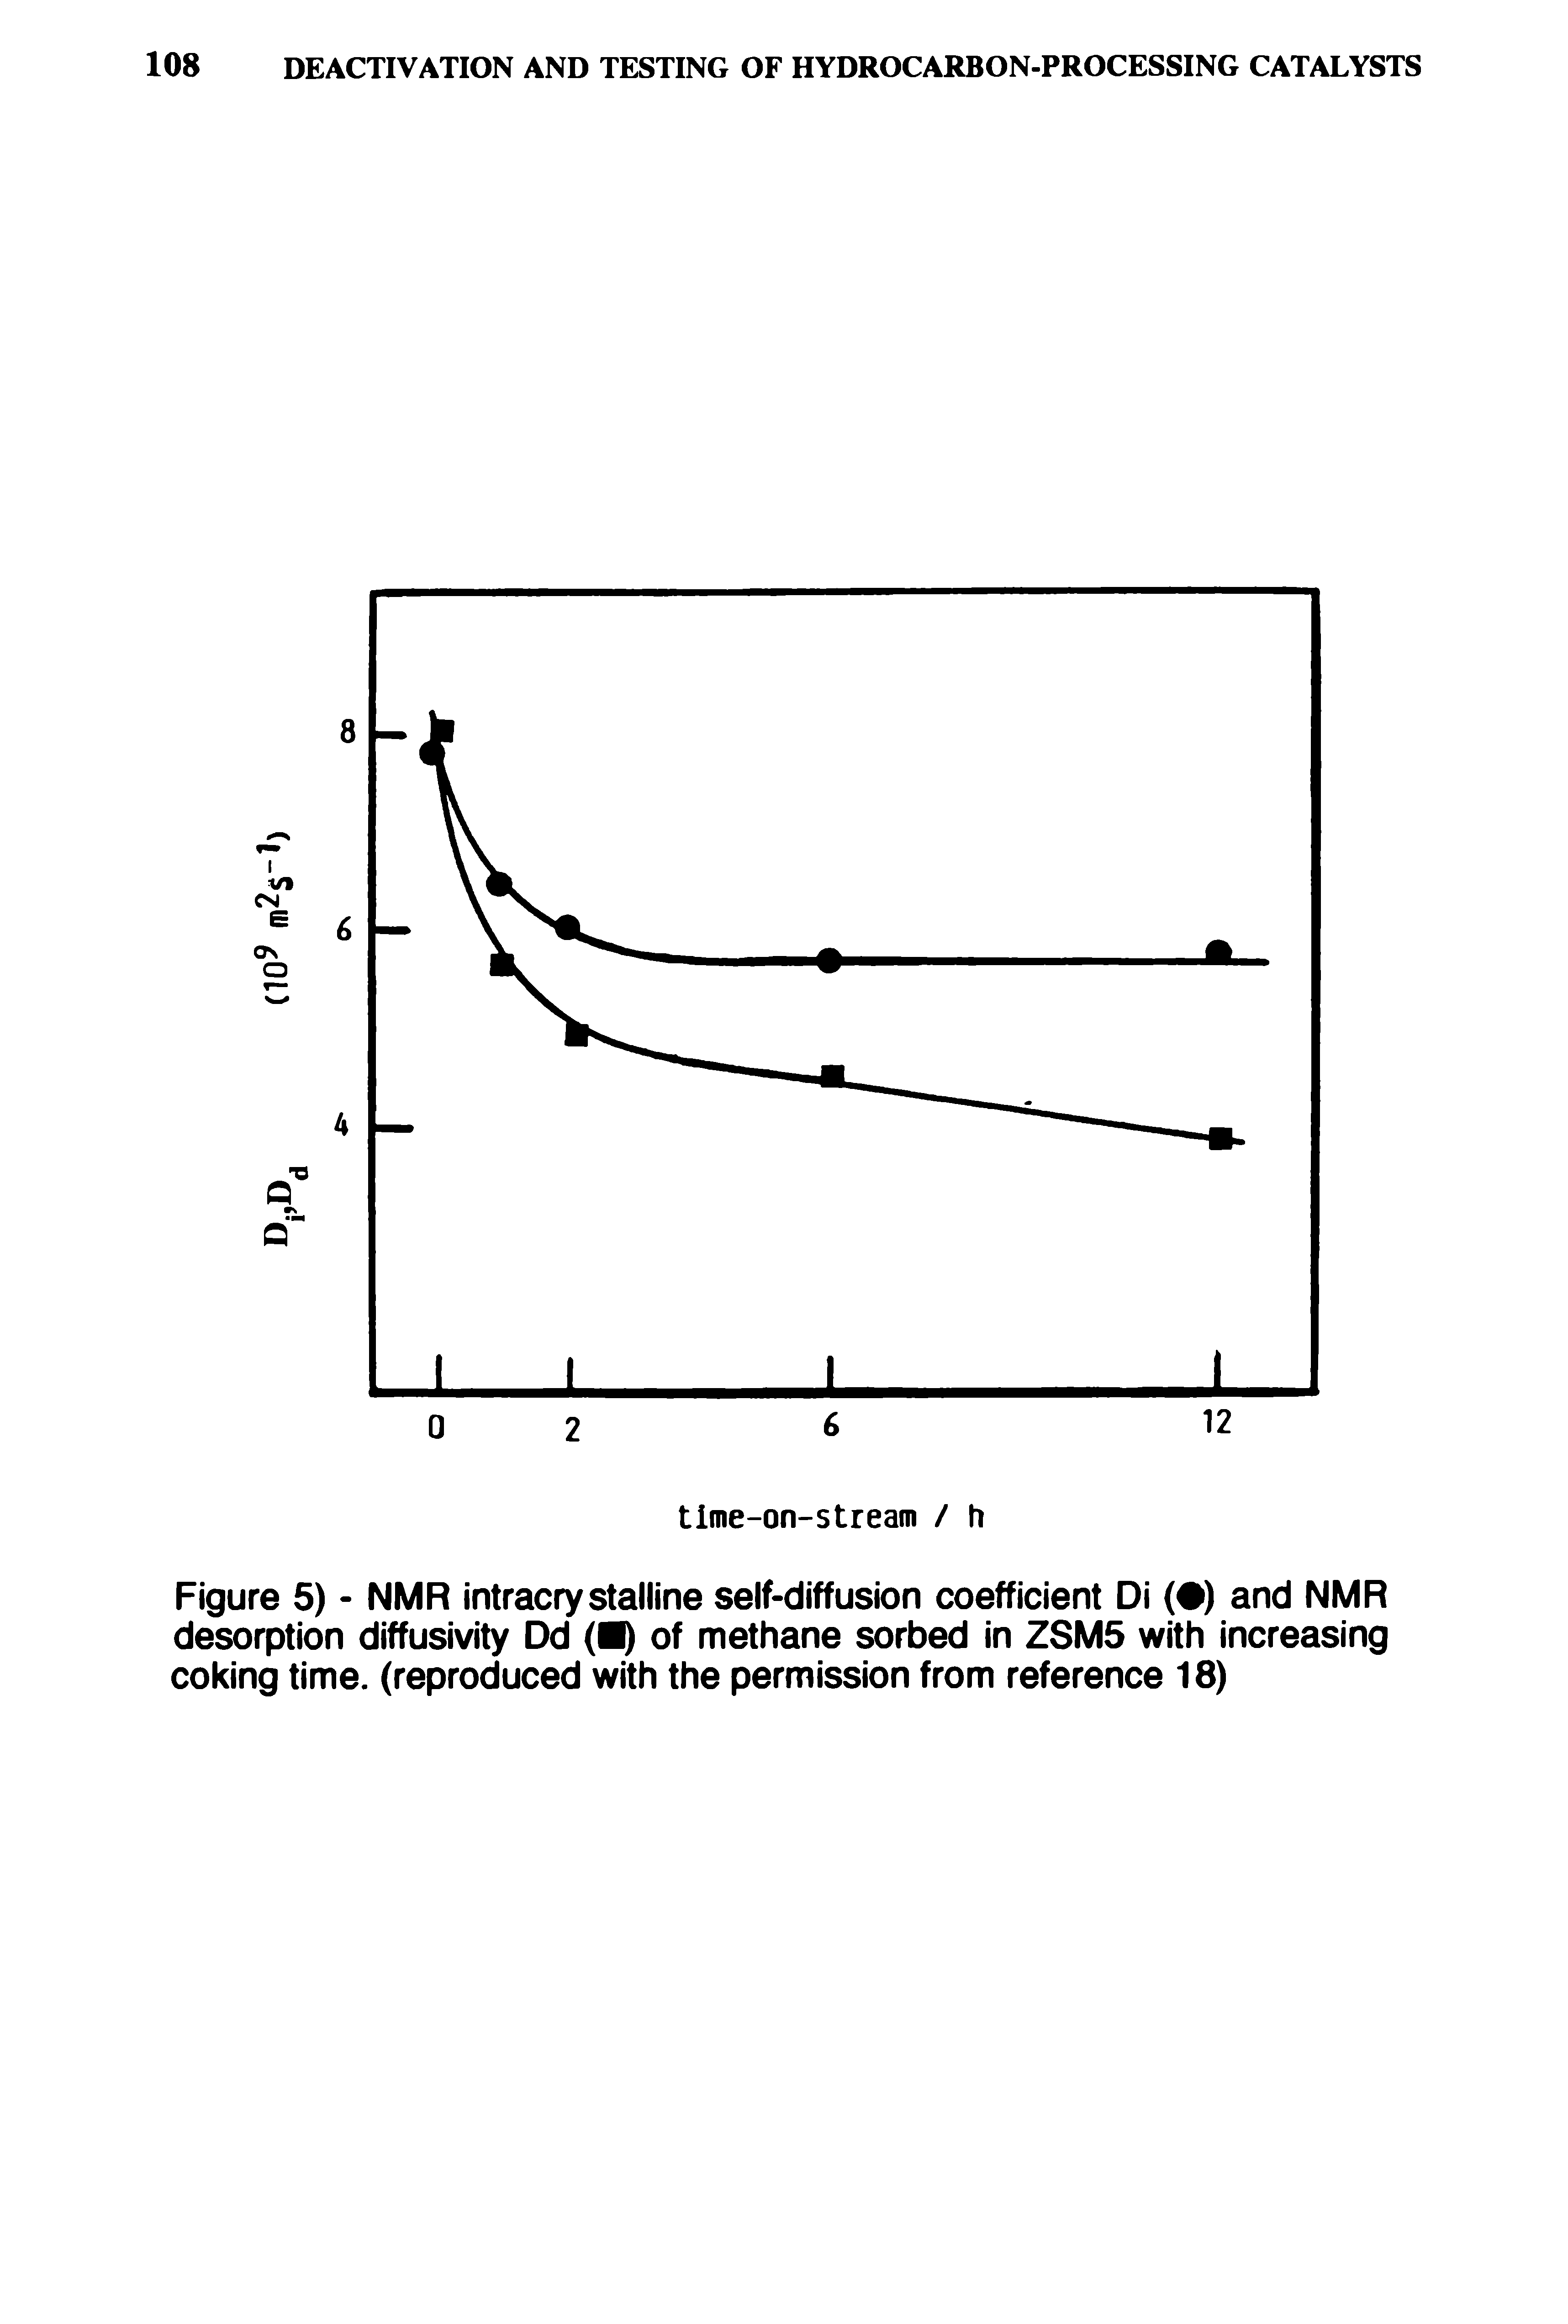 Figure 5) NMR intracrystalline self-diffusion coefficient Di ( ) and NMR desorption diffusivity Dd of methane sorbed in ZSM5 with increasing coking time, (reproduced with the permission from reference 18)...